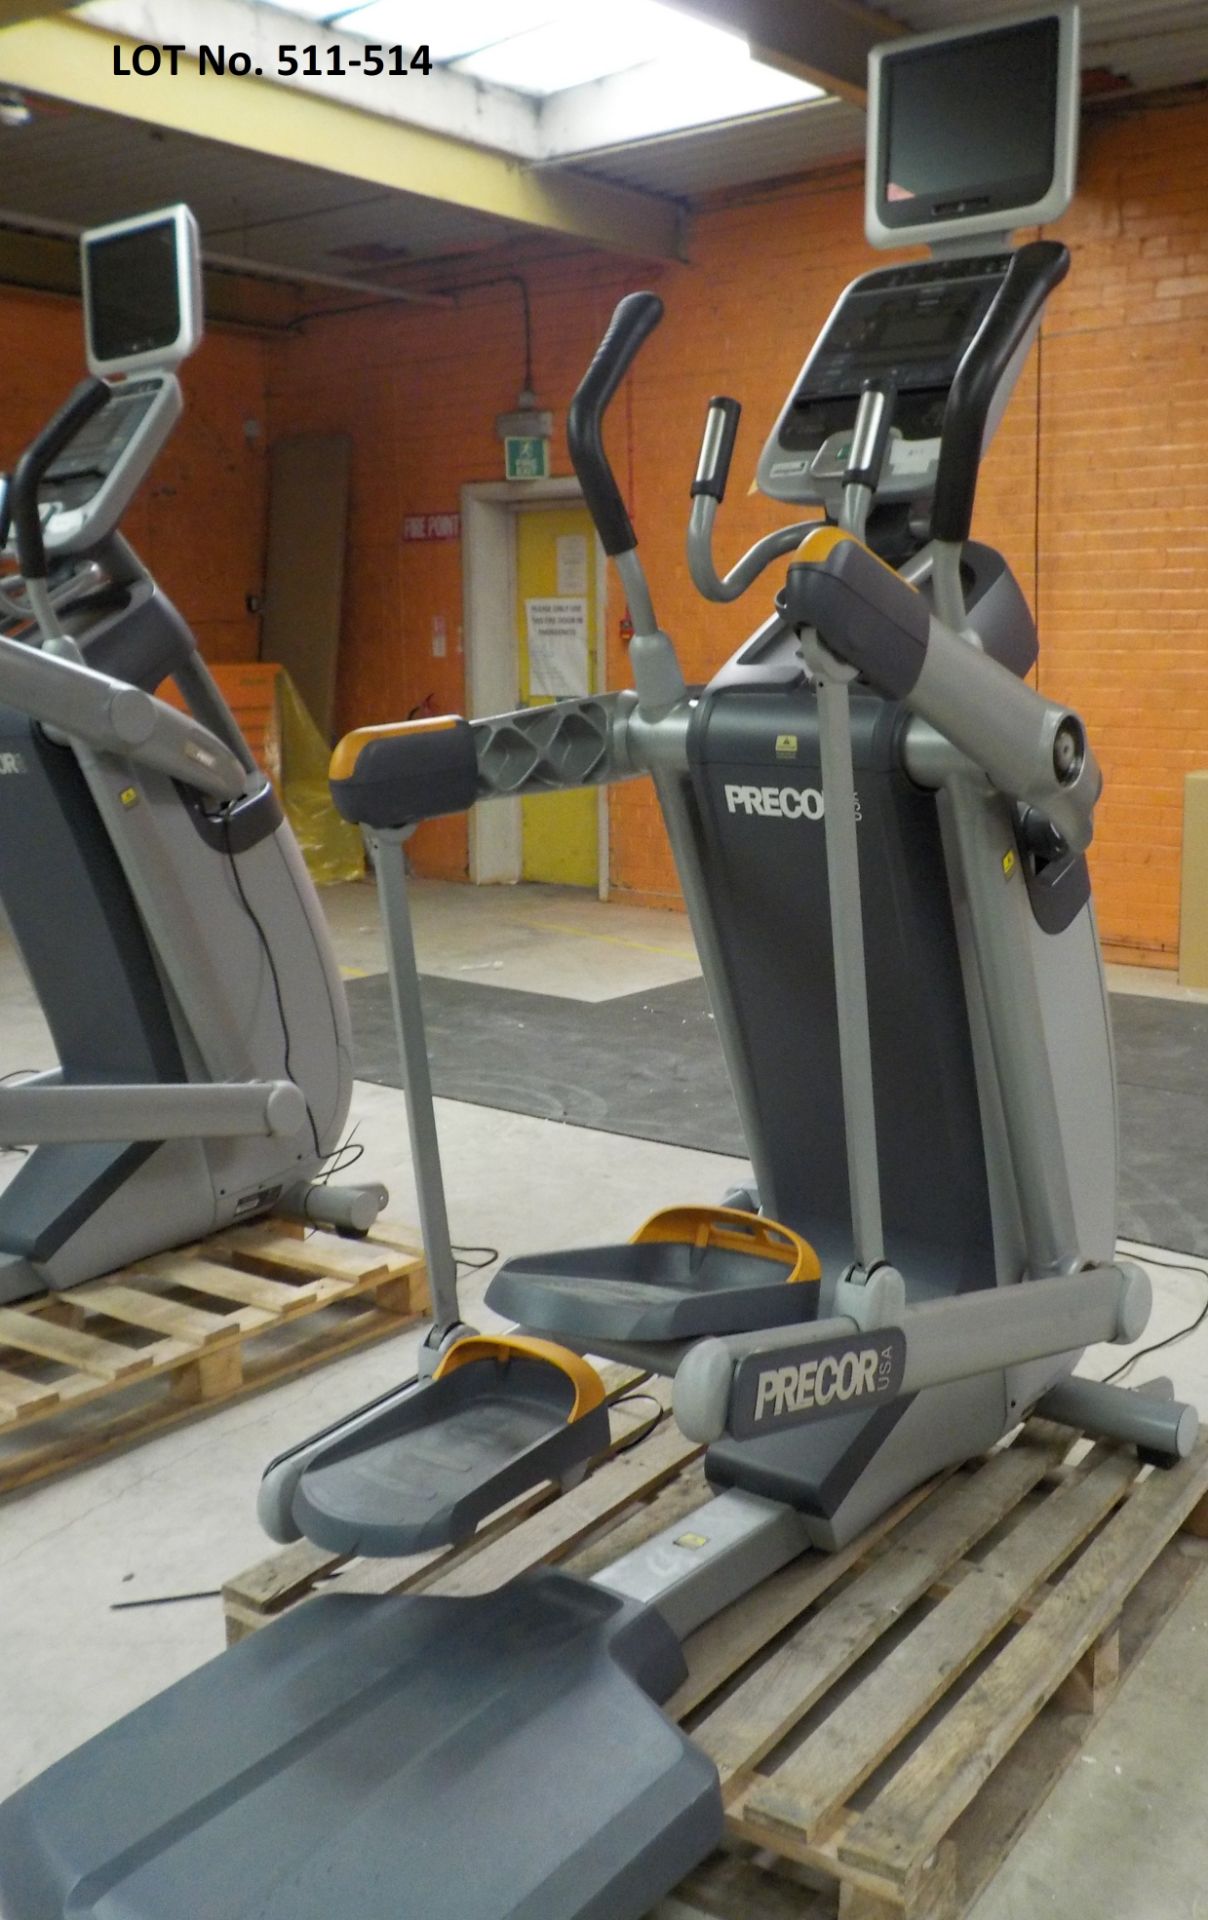 PRECOR ASSENT TRAINER - AMT - 100i (WITH TV) serial number A927K10090046 *PLEASE NOTE - this lot is